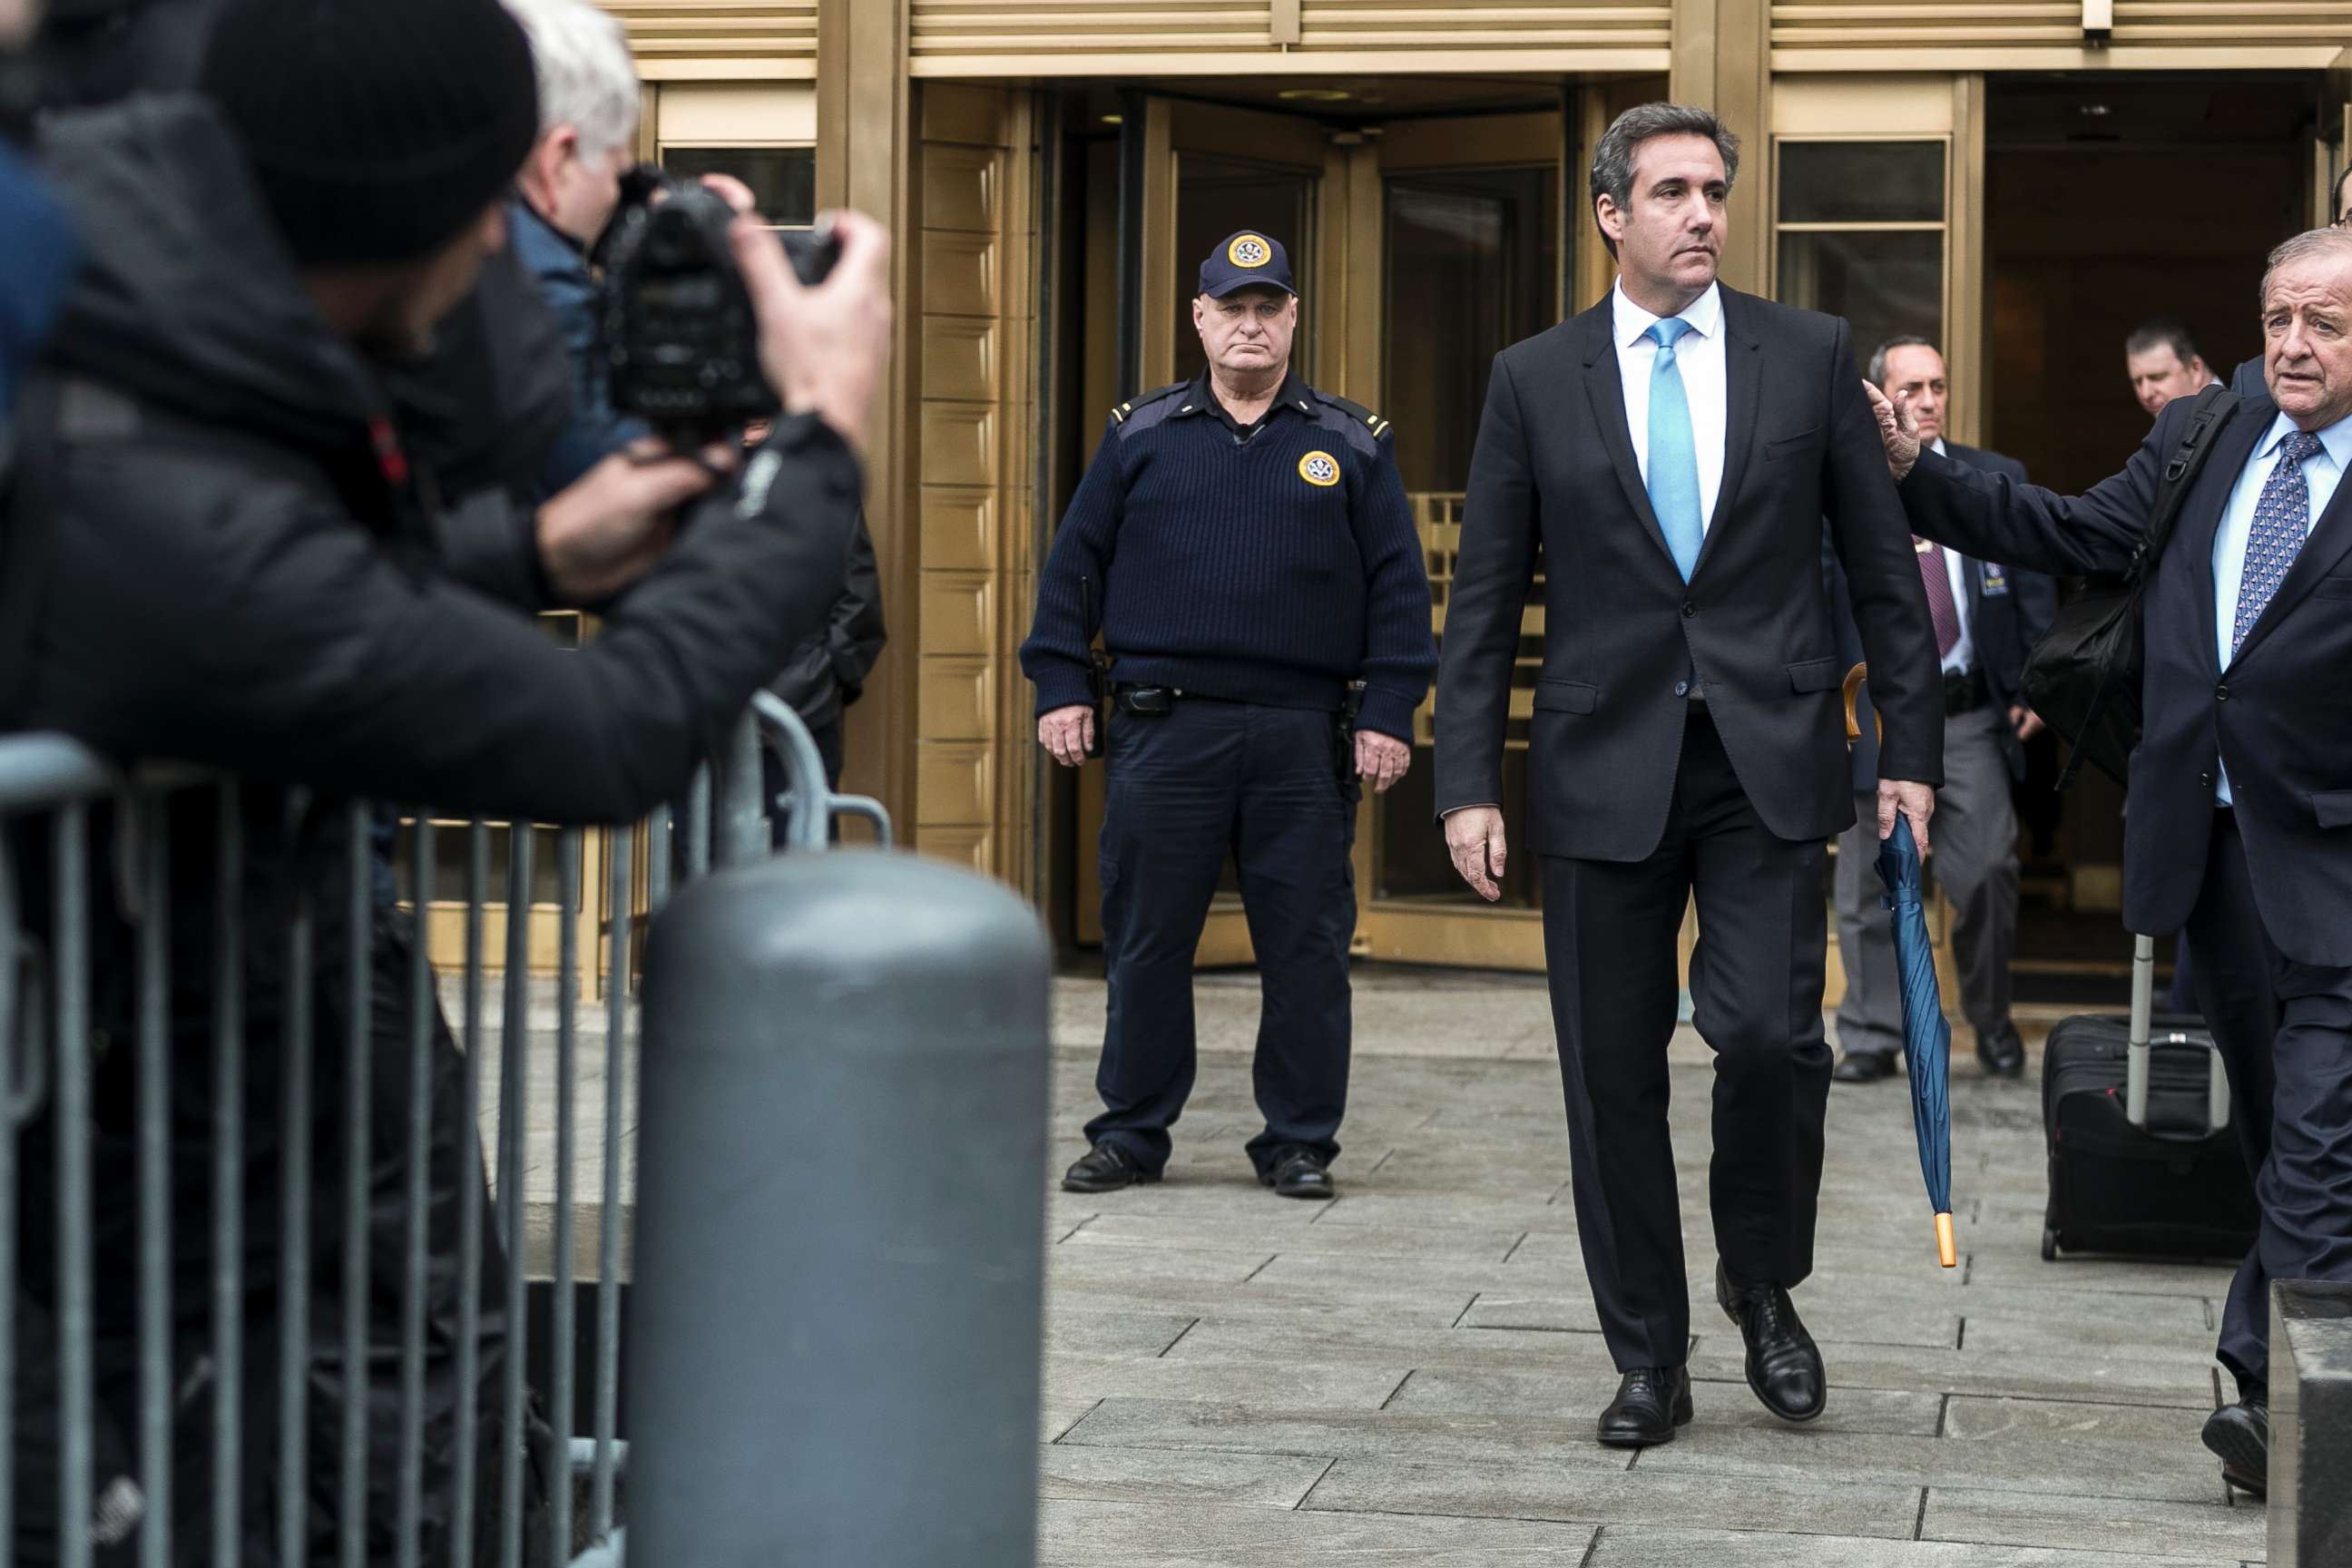 PHOTO: Michael Cohen, President Donald Trump's longtime personal lawyer, leaves federal court in New York, April 16, 2018.